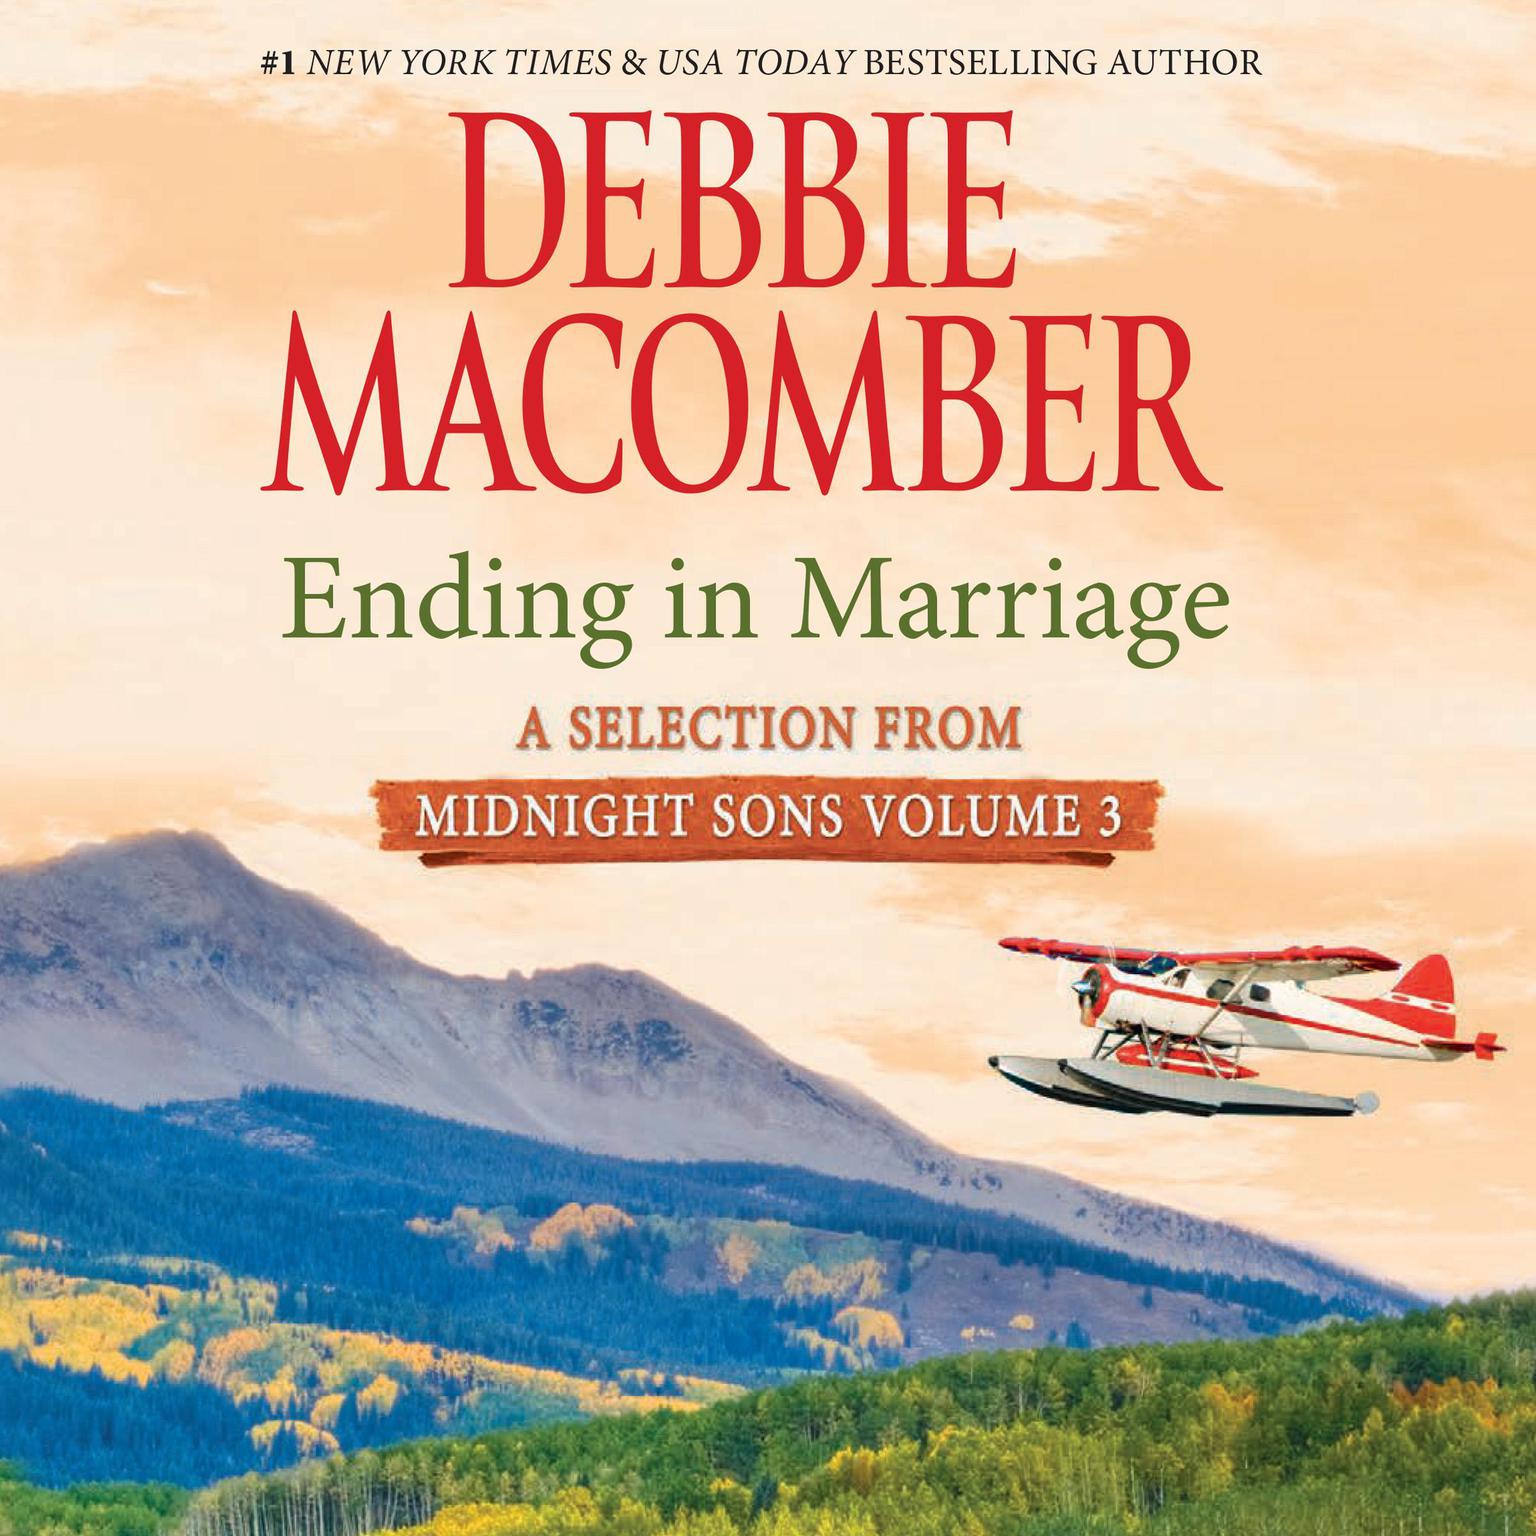 Ending in Marriage: A Selection from Midnight Sons Volume 3 Audiobook, by Debbie Macomber